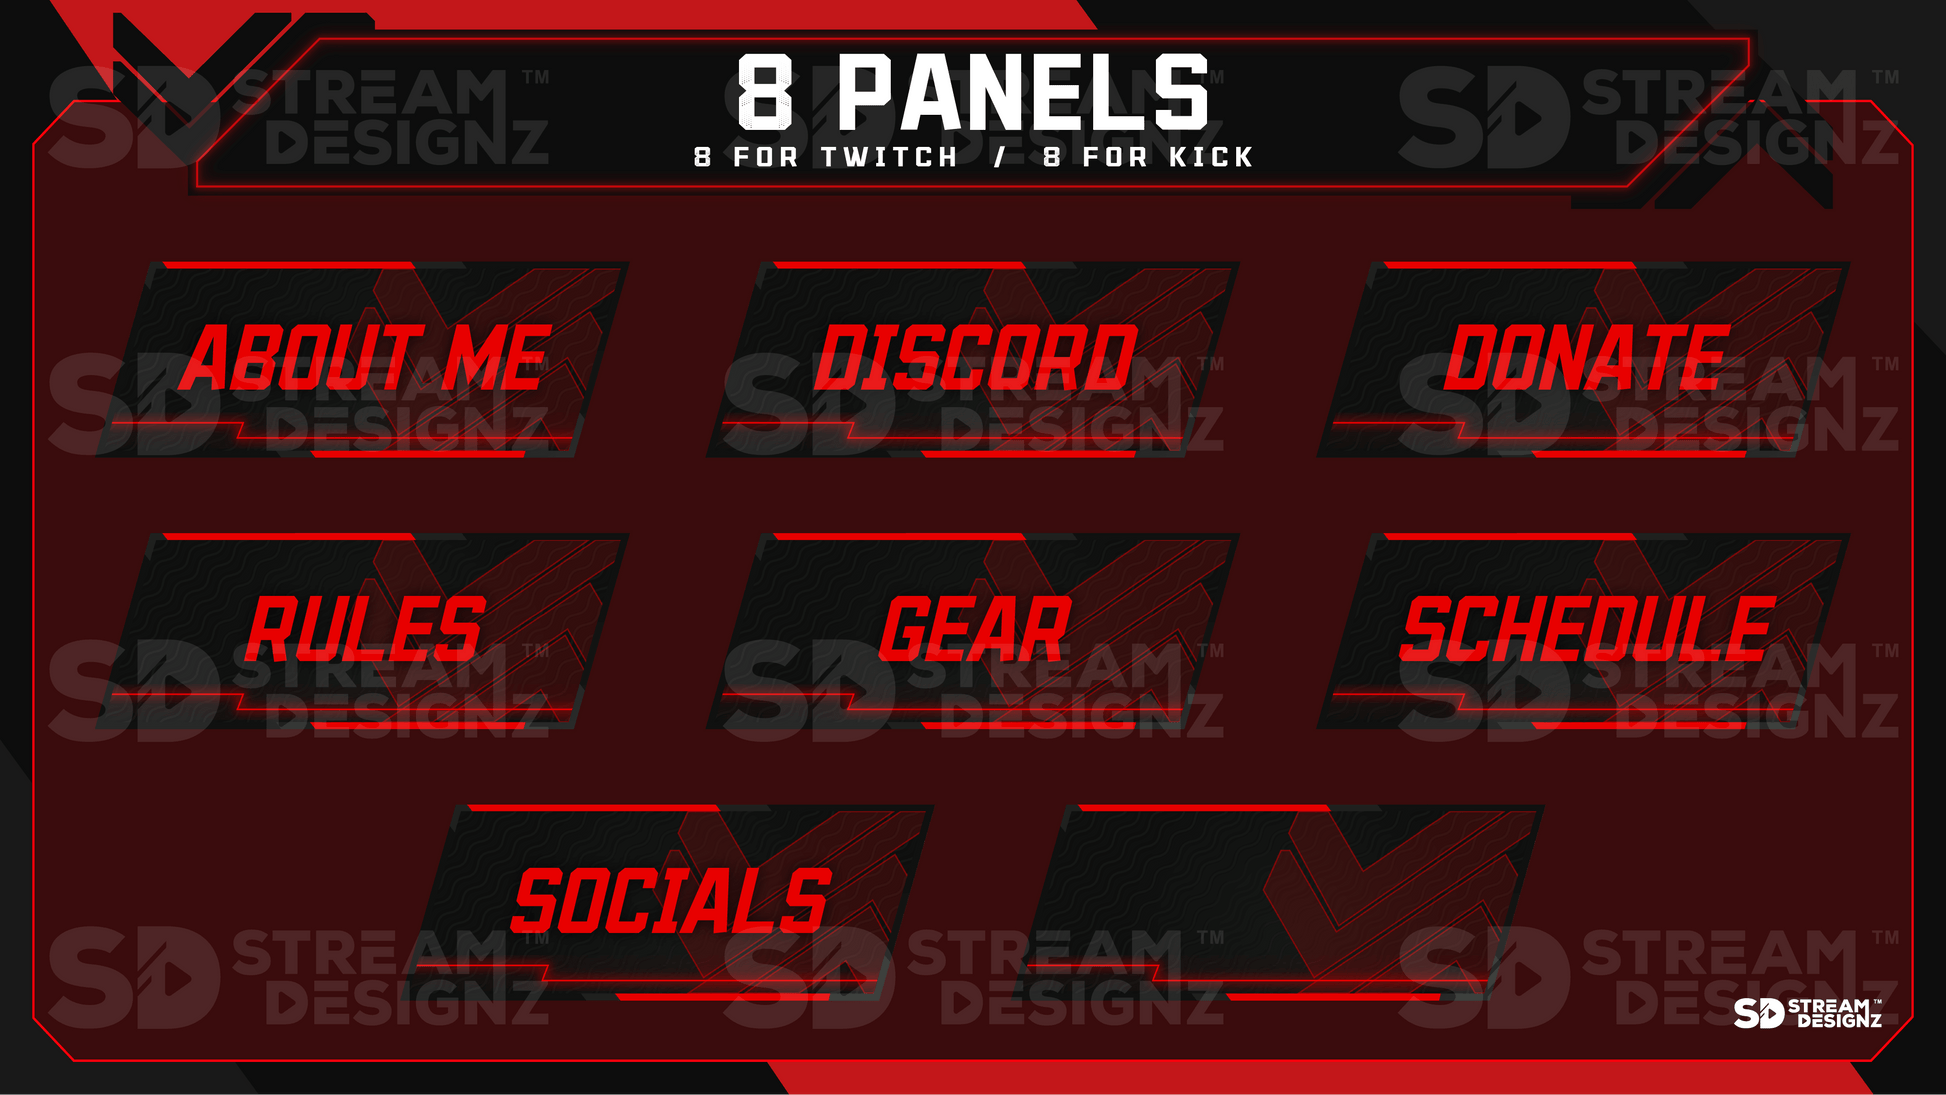 animated stream overlay package 8 panels code red stream designz